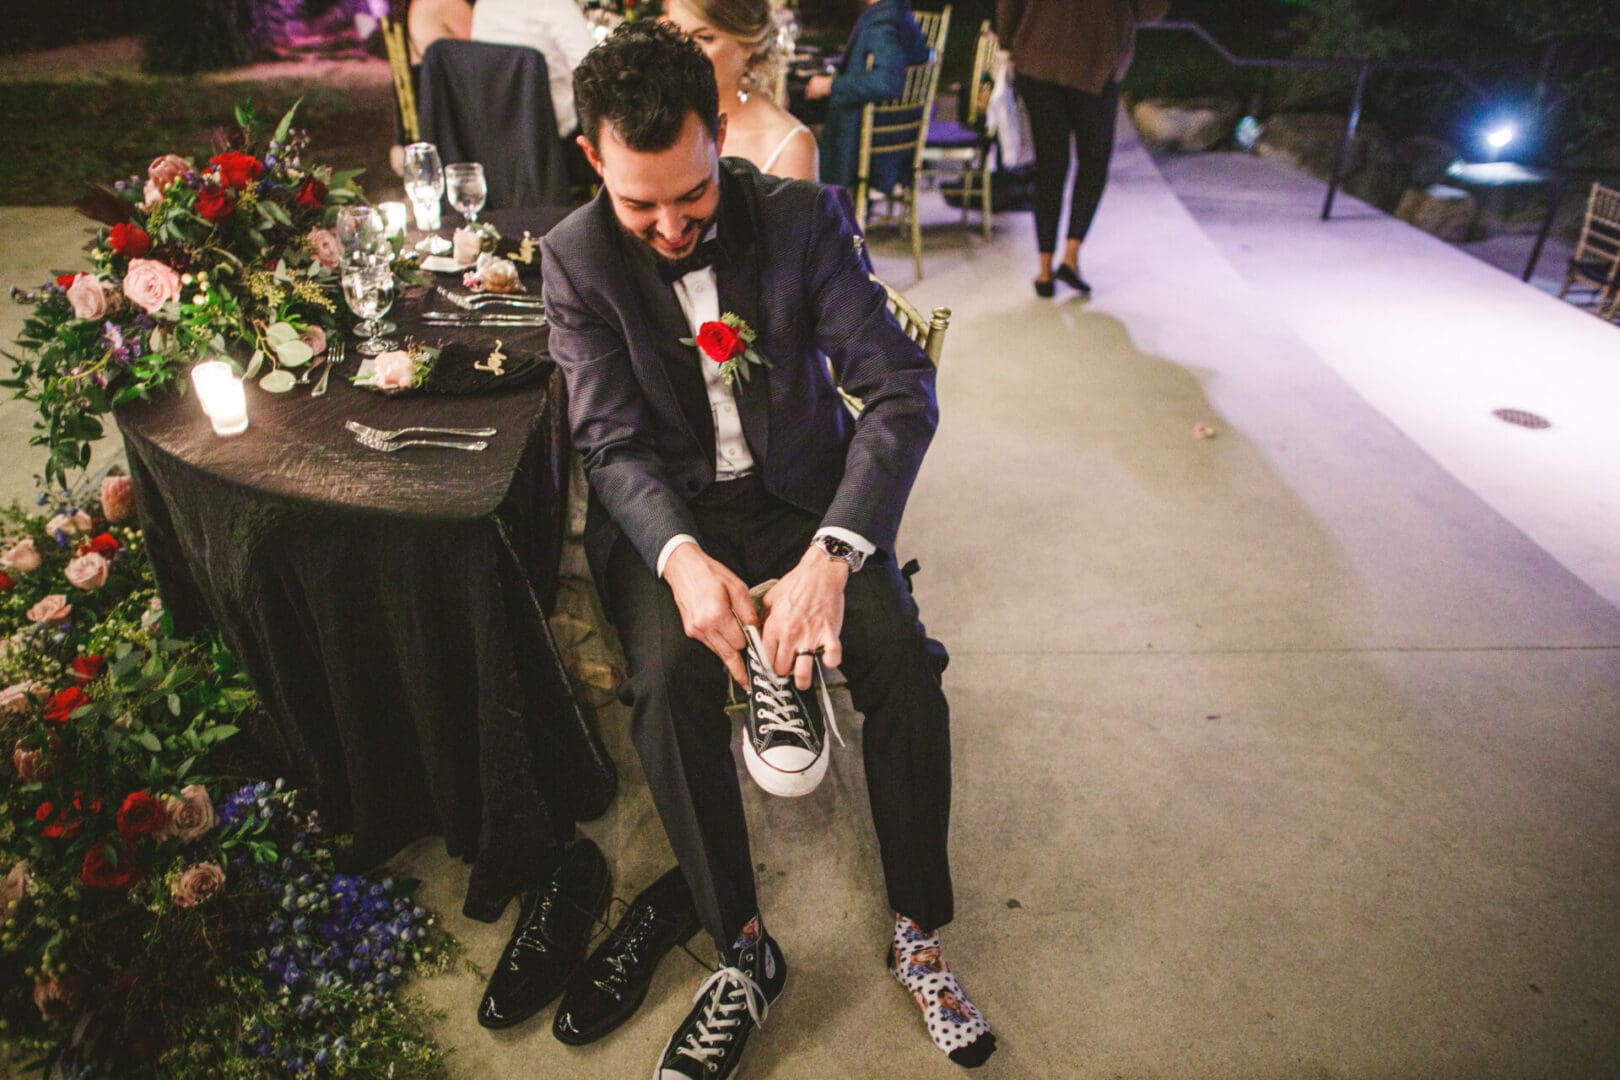 A man in a suit and tie tying his shoe.